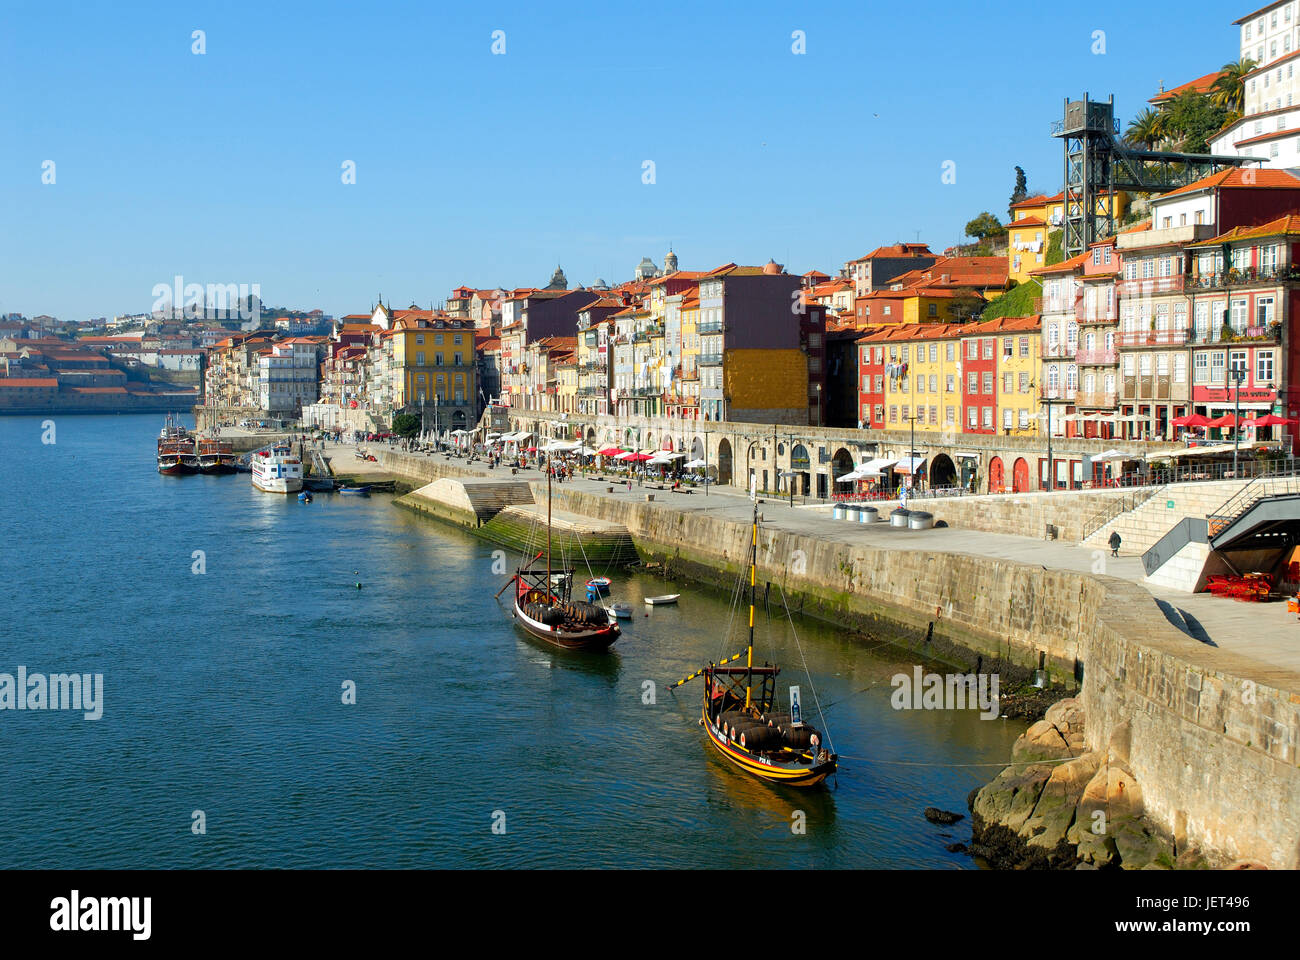 Oporto, capital of the Port wine, and the Ribeira district with rabelo boats, a UNESCO World Heritage Site, Portugal Stock Photo